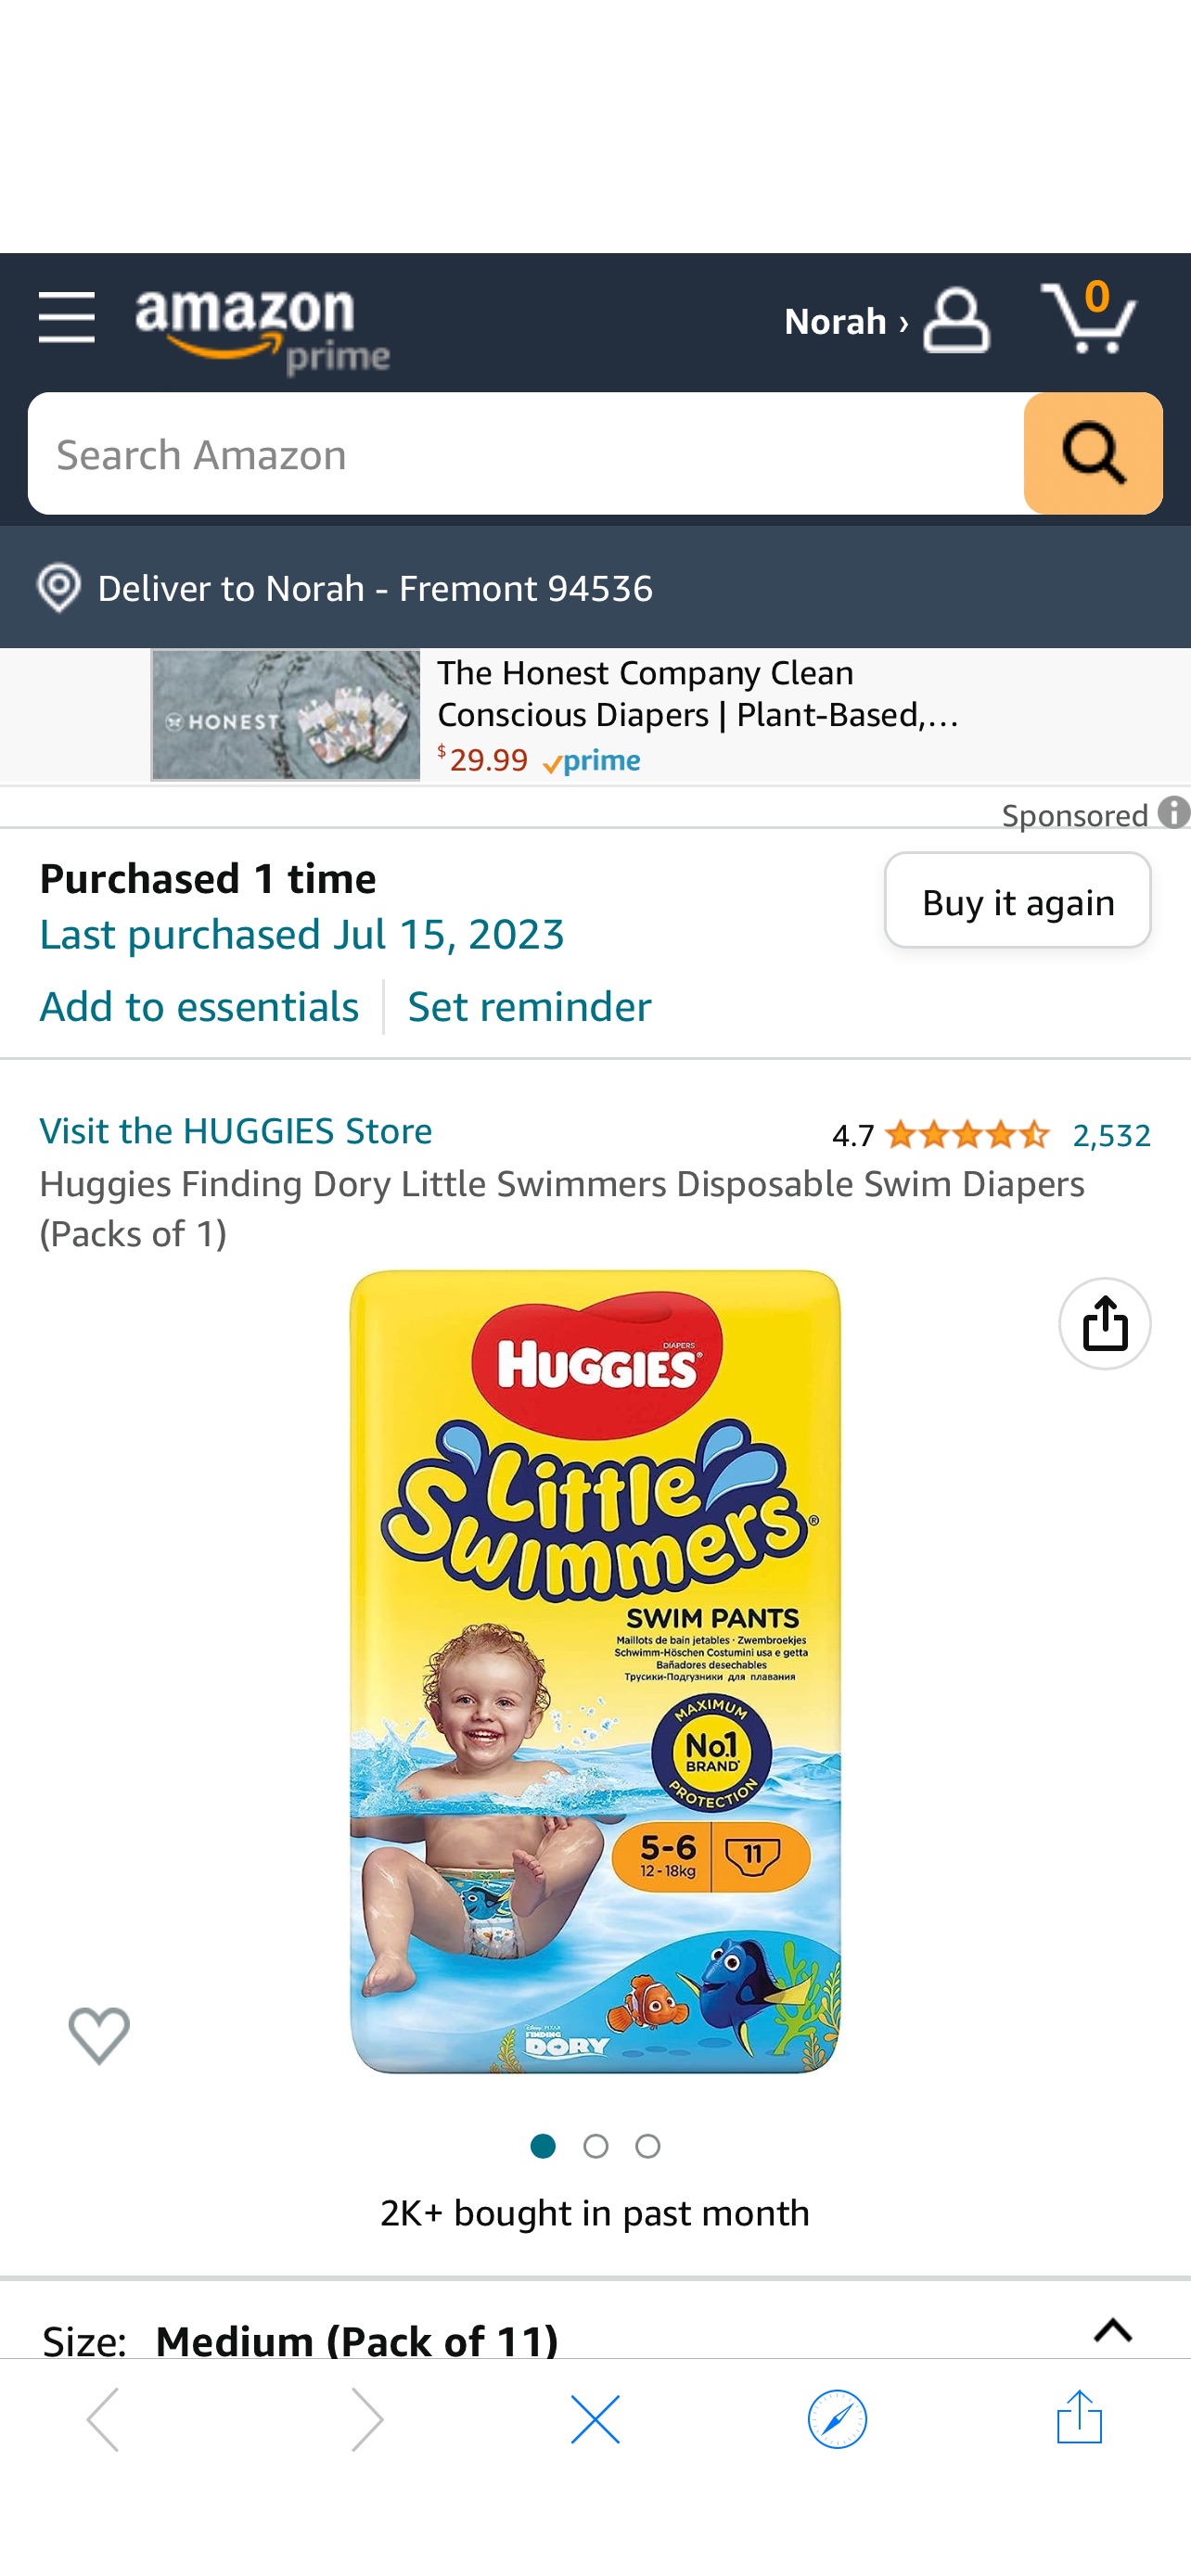 Amazon.com: Huggies Finding Dory Little Swimmers Disposable Swim Diapers (Packs of 1) : Health & Household